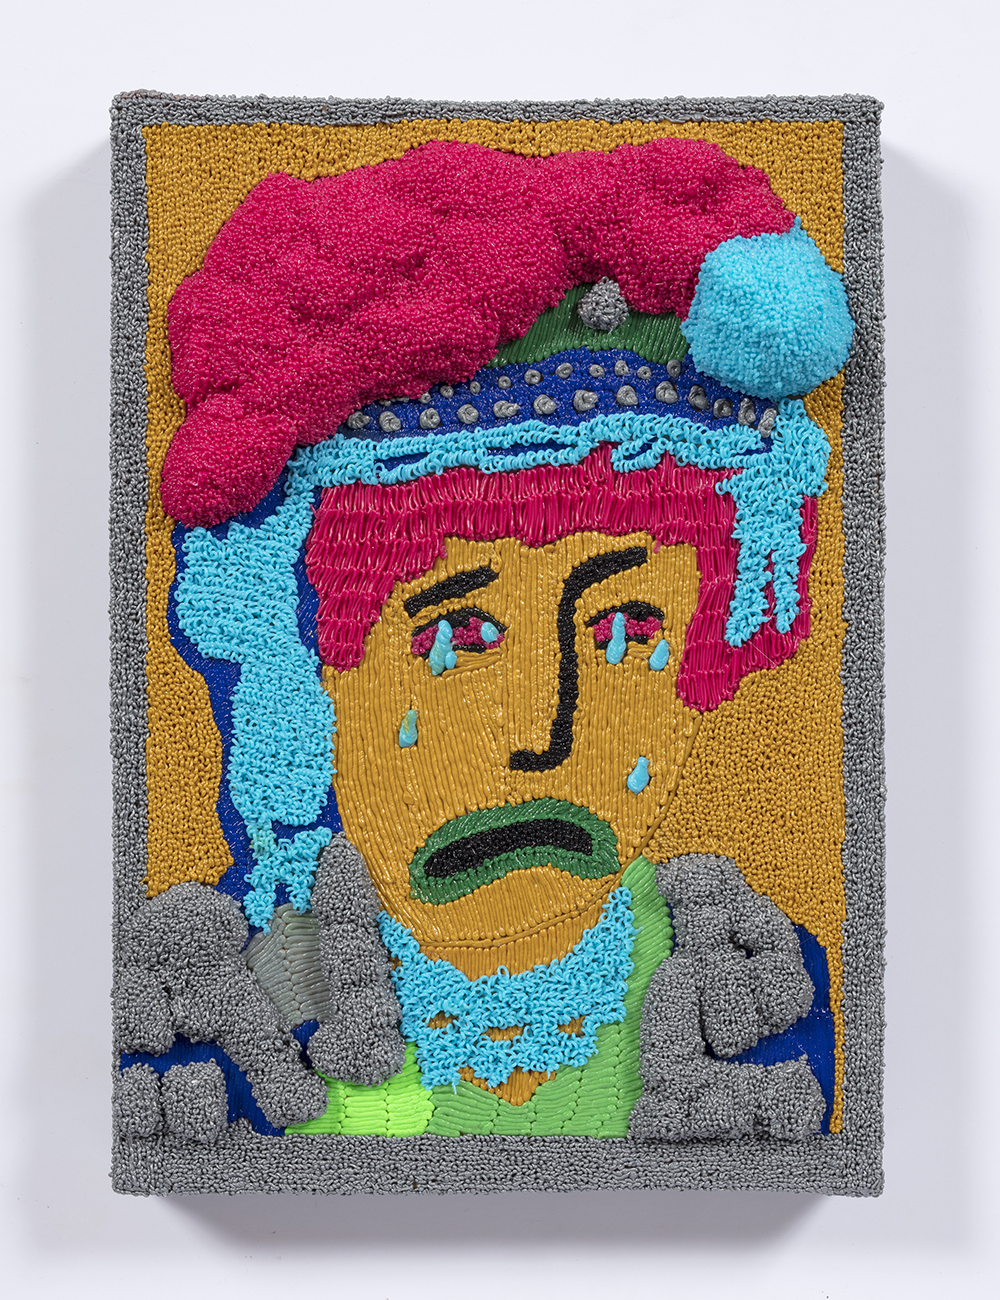 Dominic Dispirito. <em>The crying cockney</em>, 2018. Manually printed PLA plastic on board, 11 3/4 x 8 1/4 inches  (30 x 21 cm)